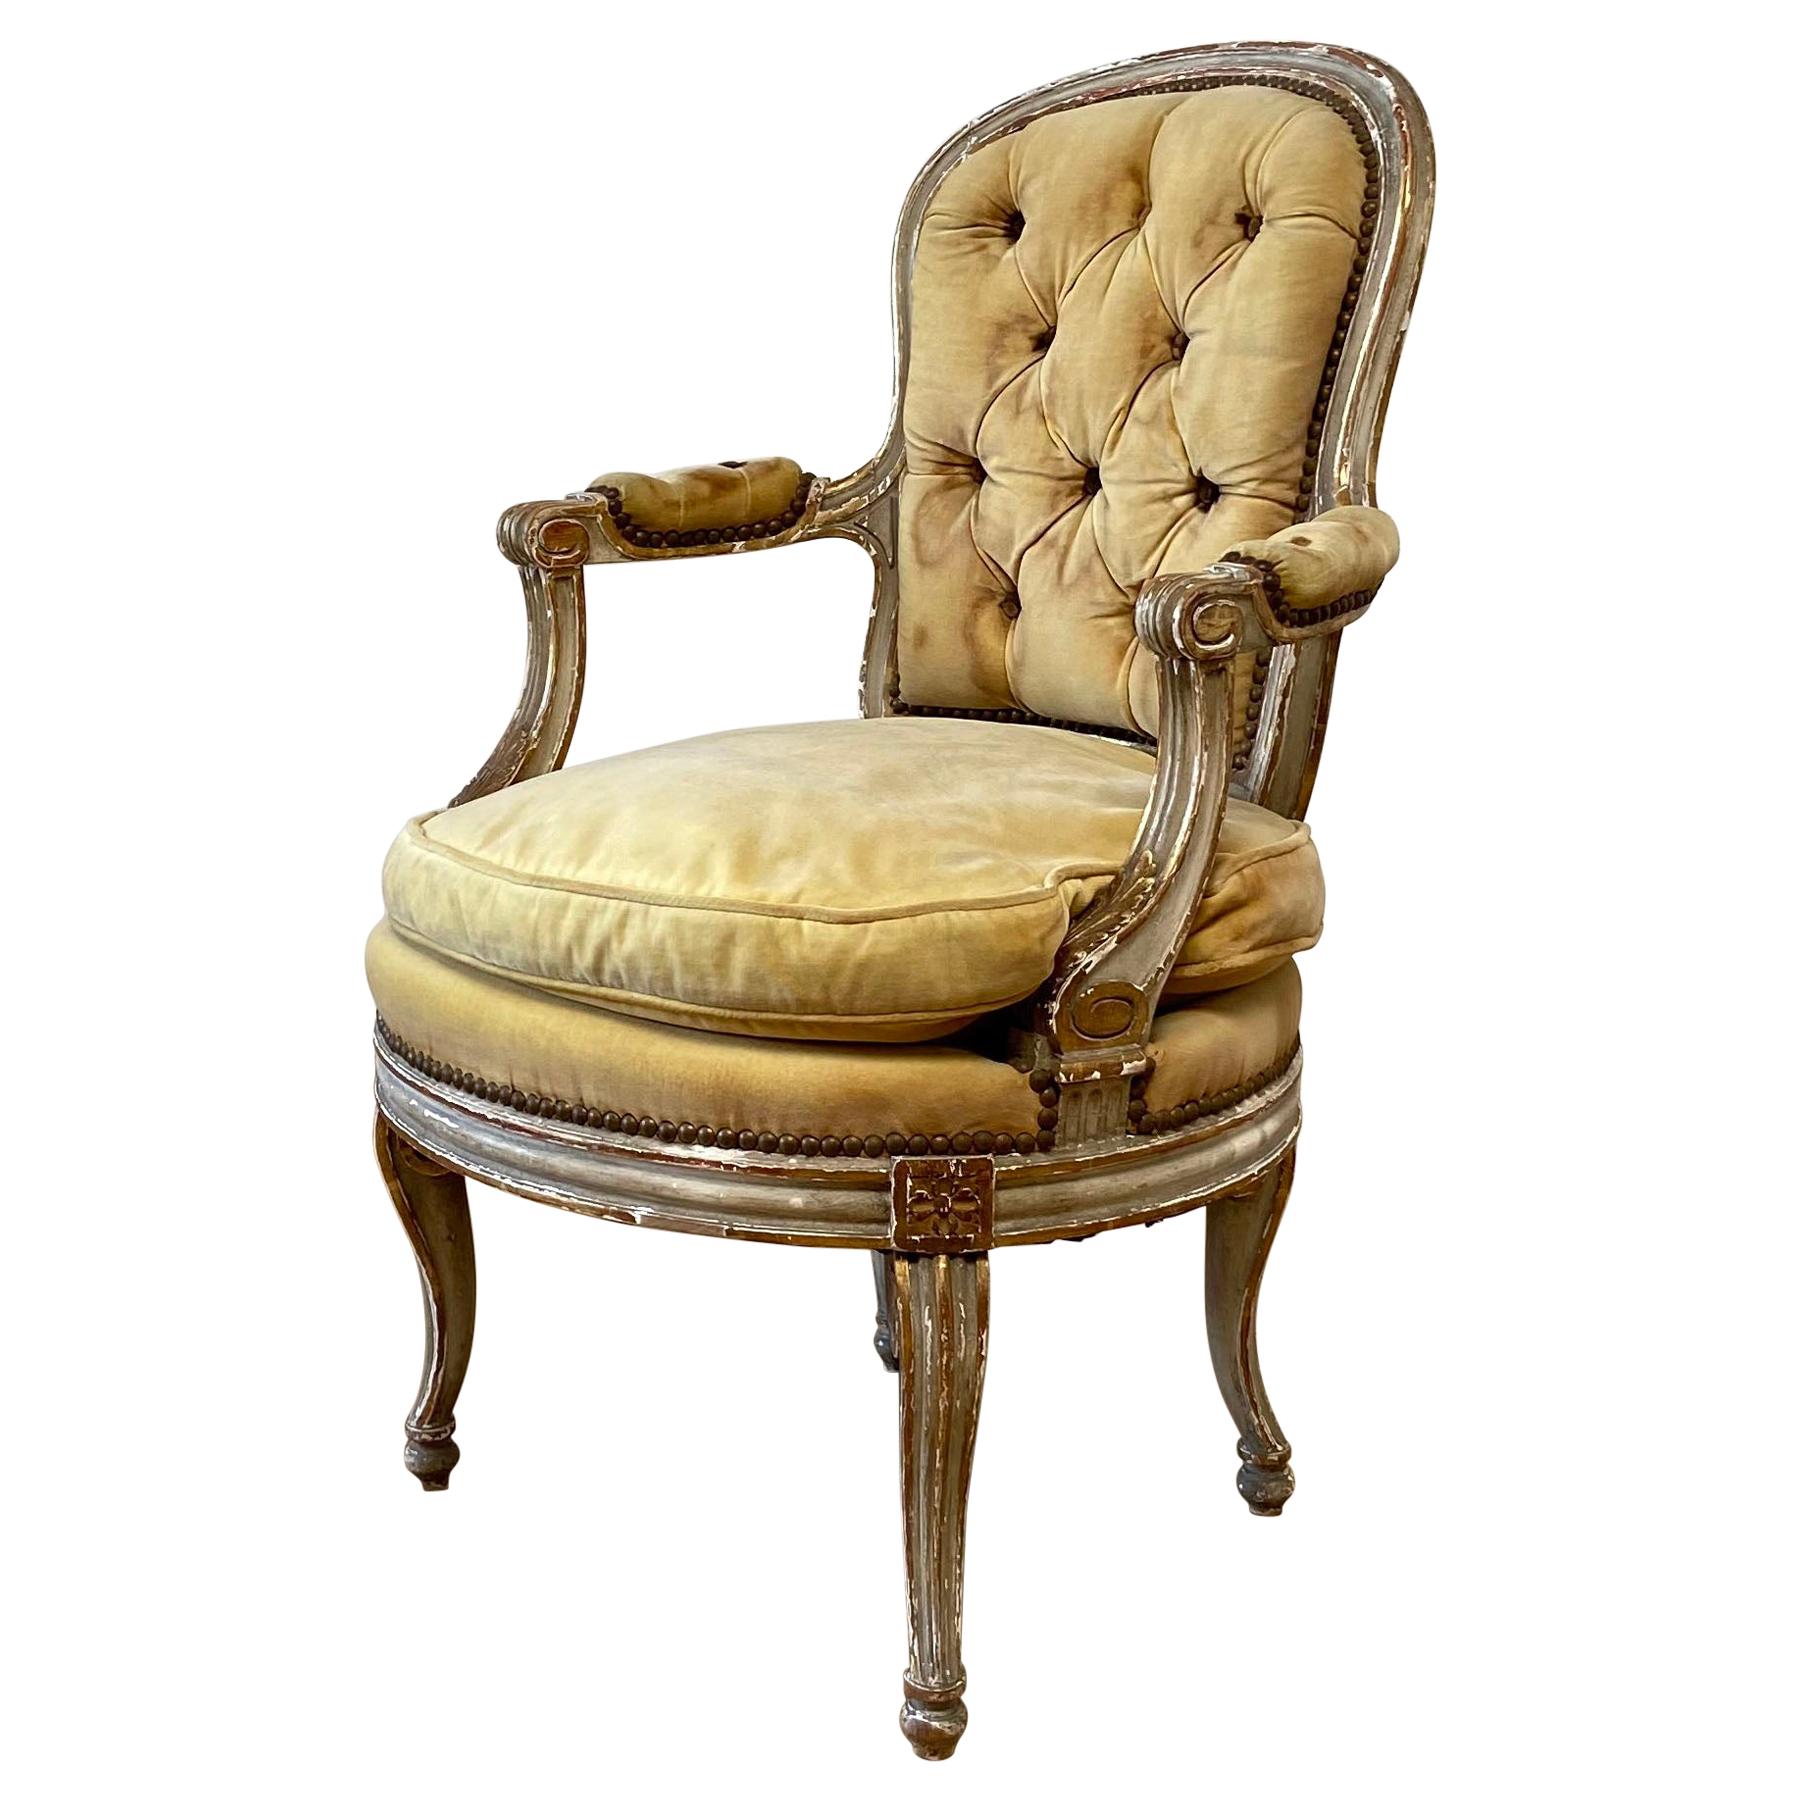 Antique French Provincial Painted and Upholstered Open Arm Chair